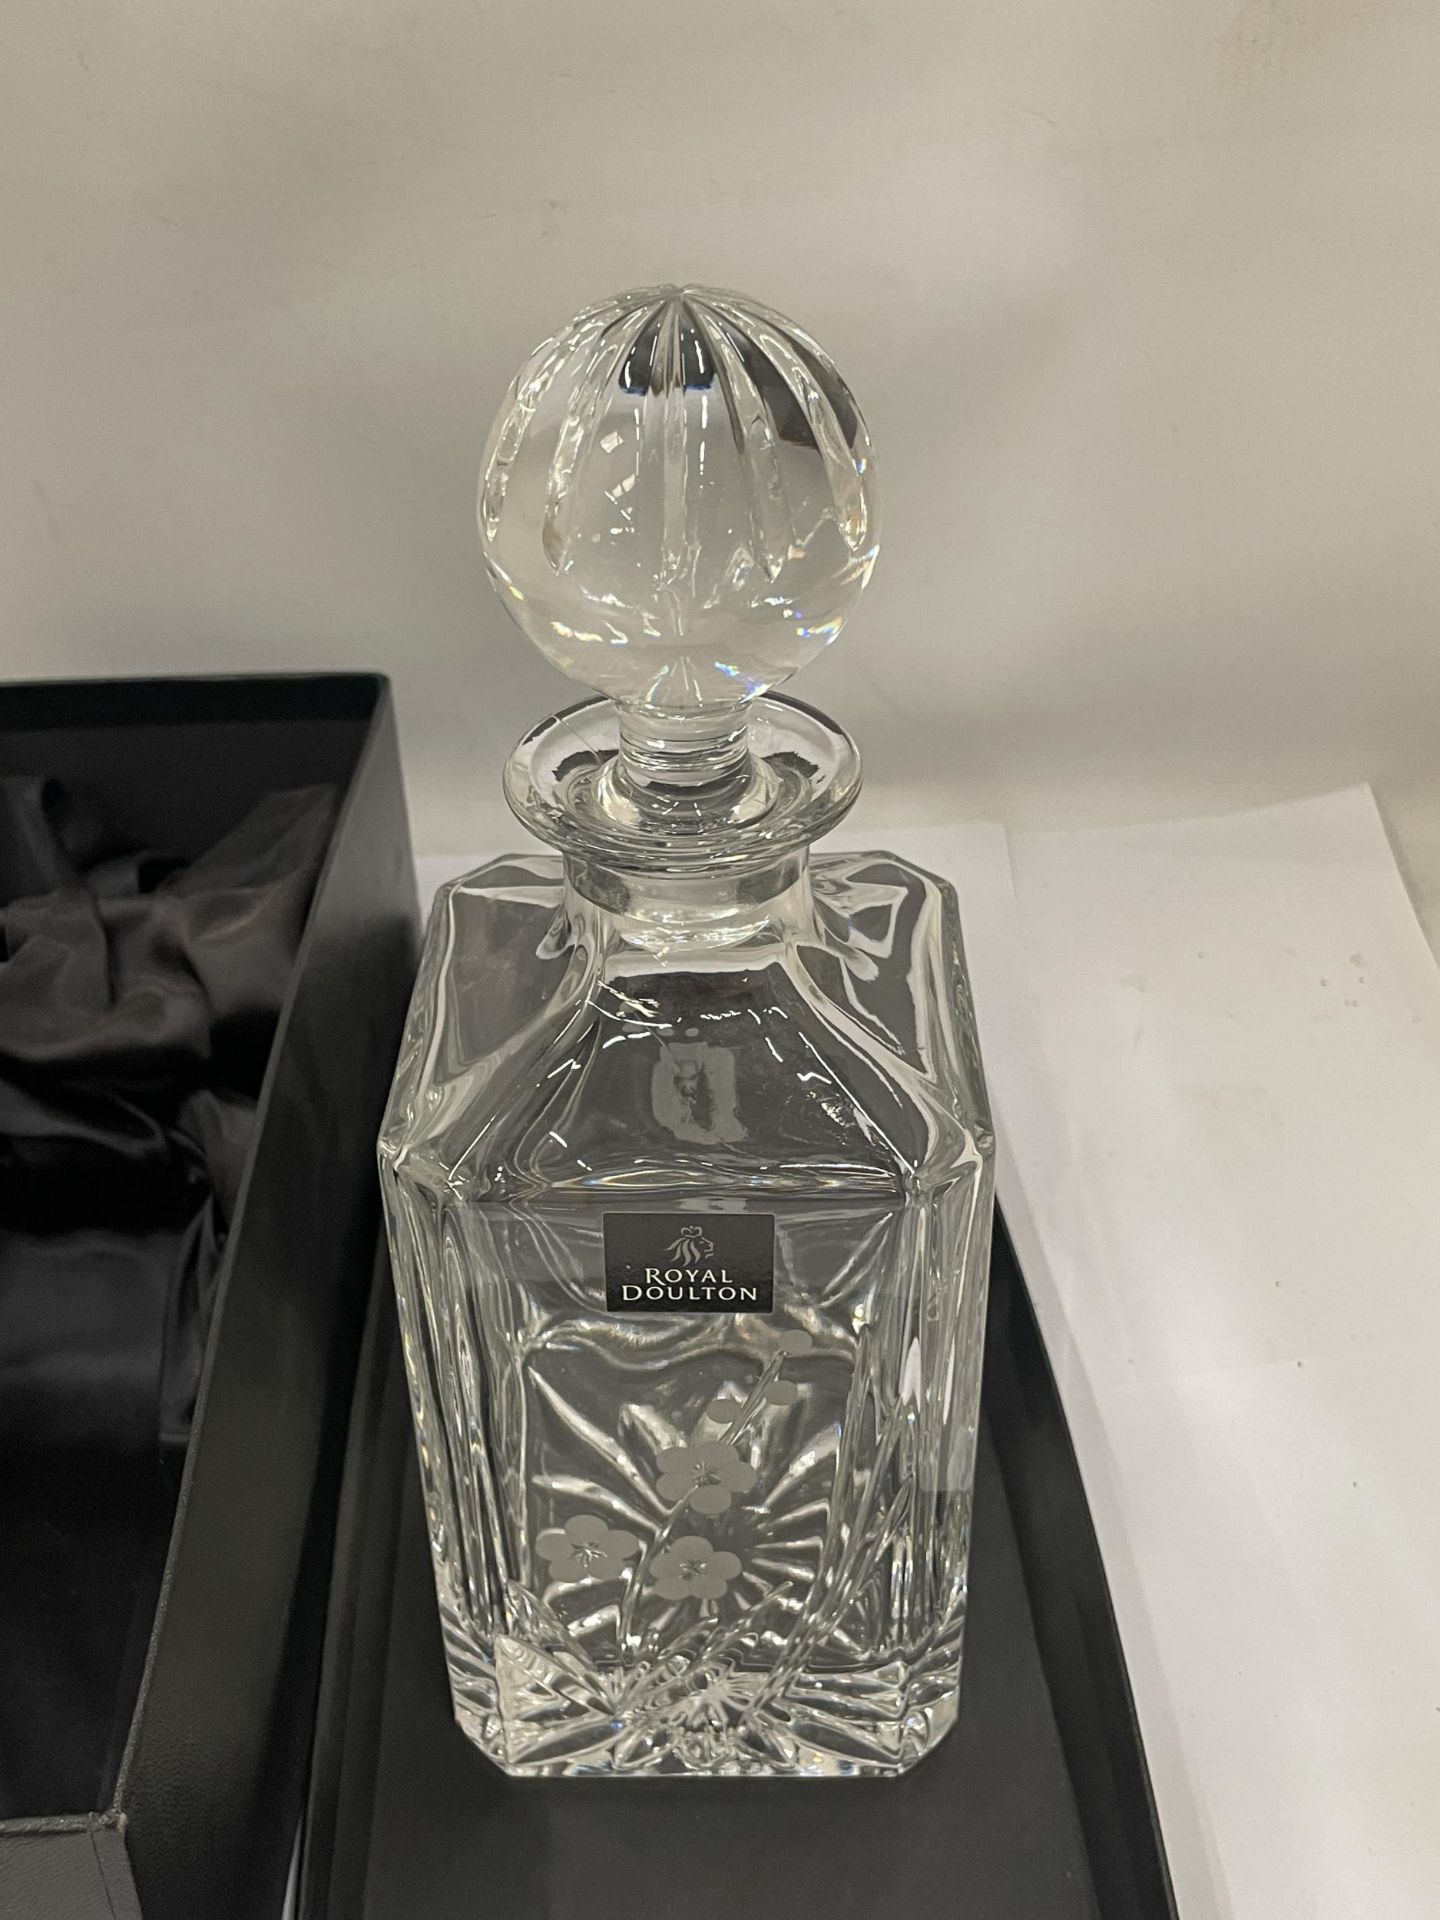 A BOXED ROYAL DOULTON GLASS DECANTER WITH ETCHED FLORAL DESIGN - Image 4 of 4